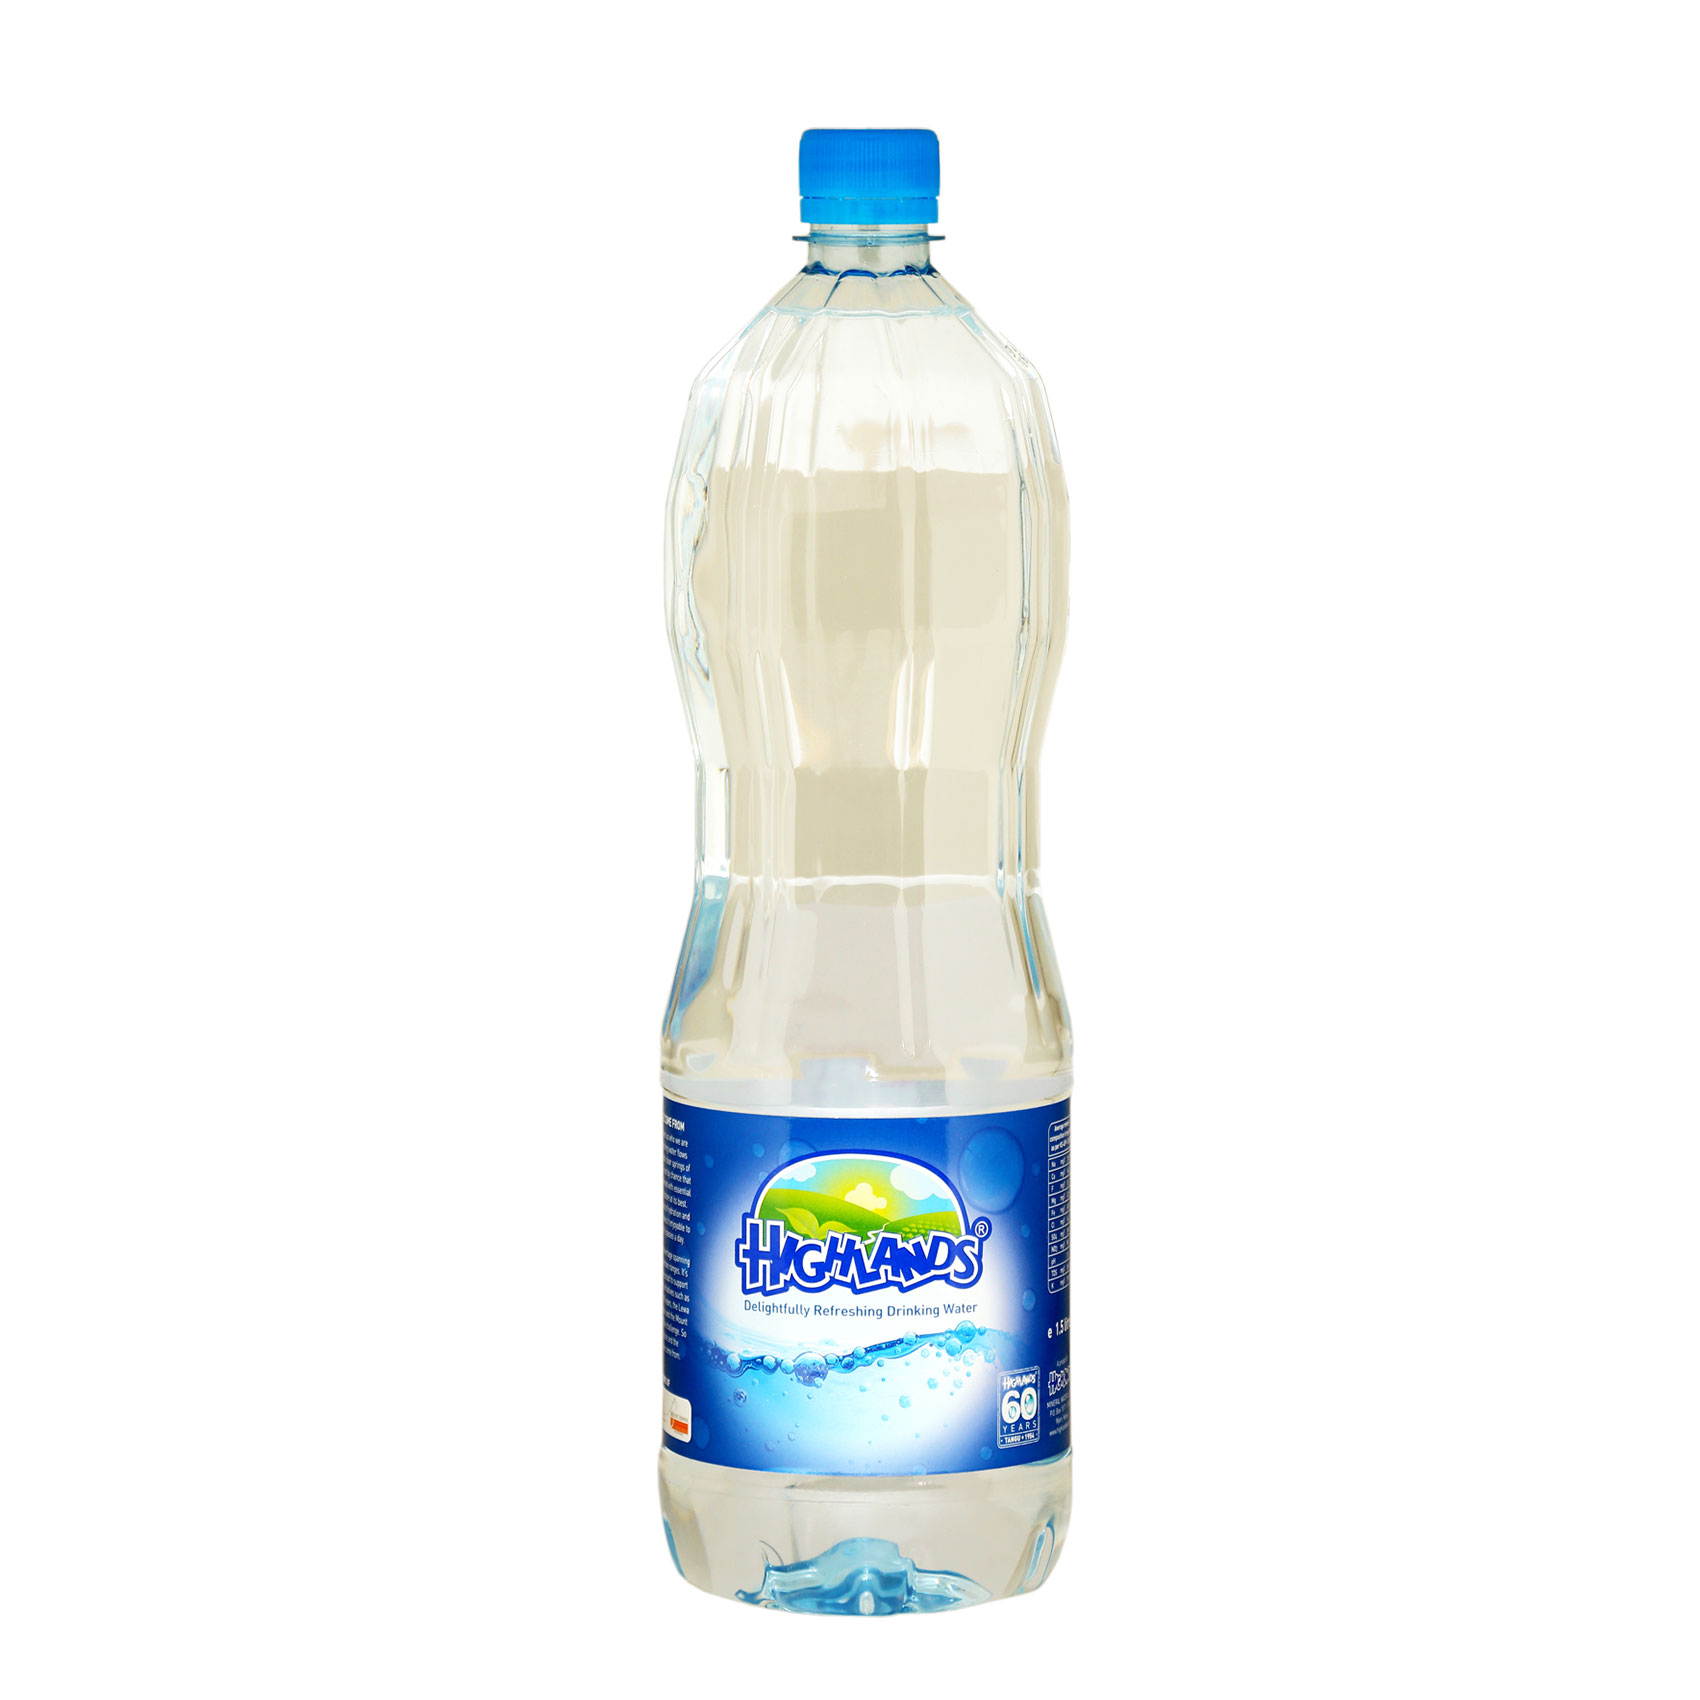 Highlands Drinking Water Juice 1L